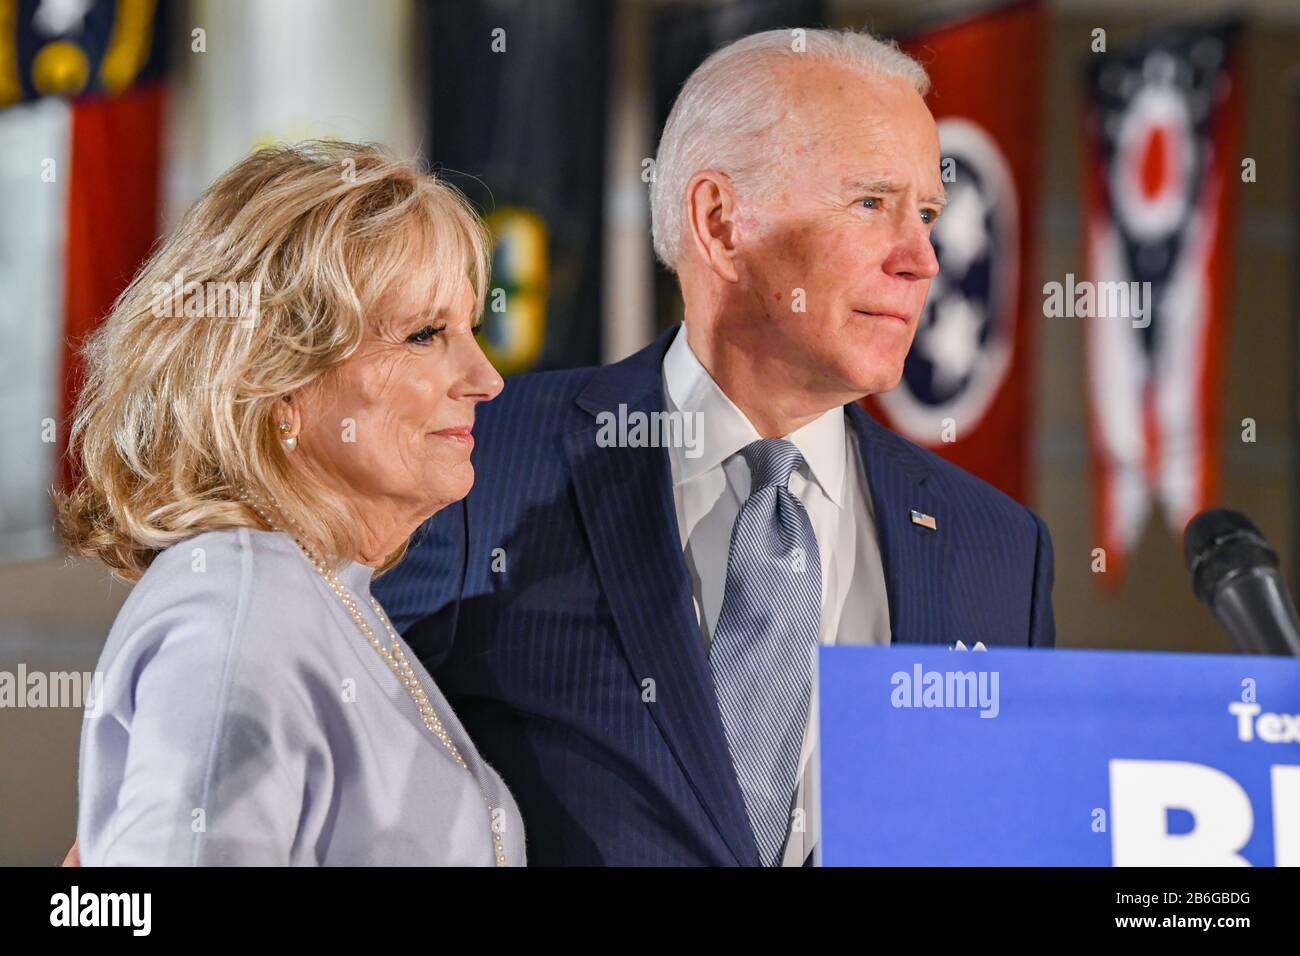 President Joe Biden and Dr. Jill Biden together on stage. United States democratic president-elect and former Vice President of the United States of America speaks at the National Convention Center in Philadelphia during primary voting. Credit: Don Mennig/Alamy Live News Stock Photo